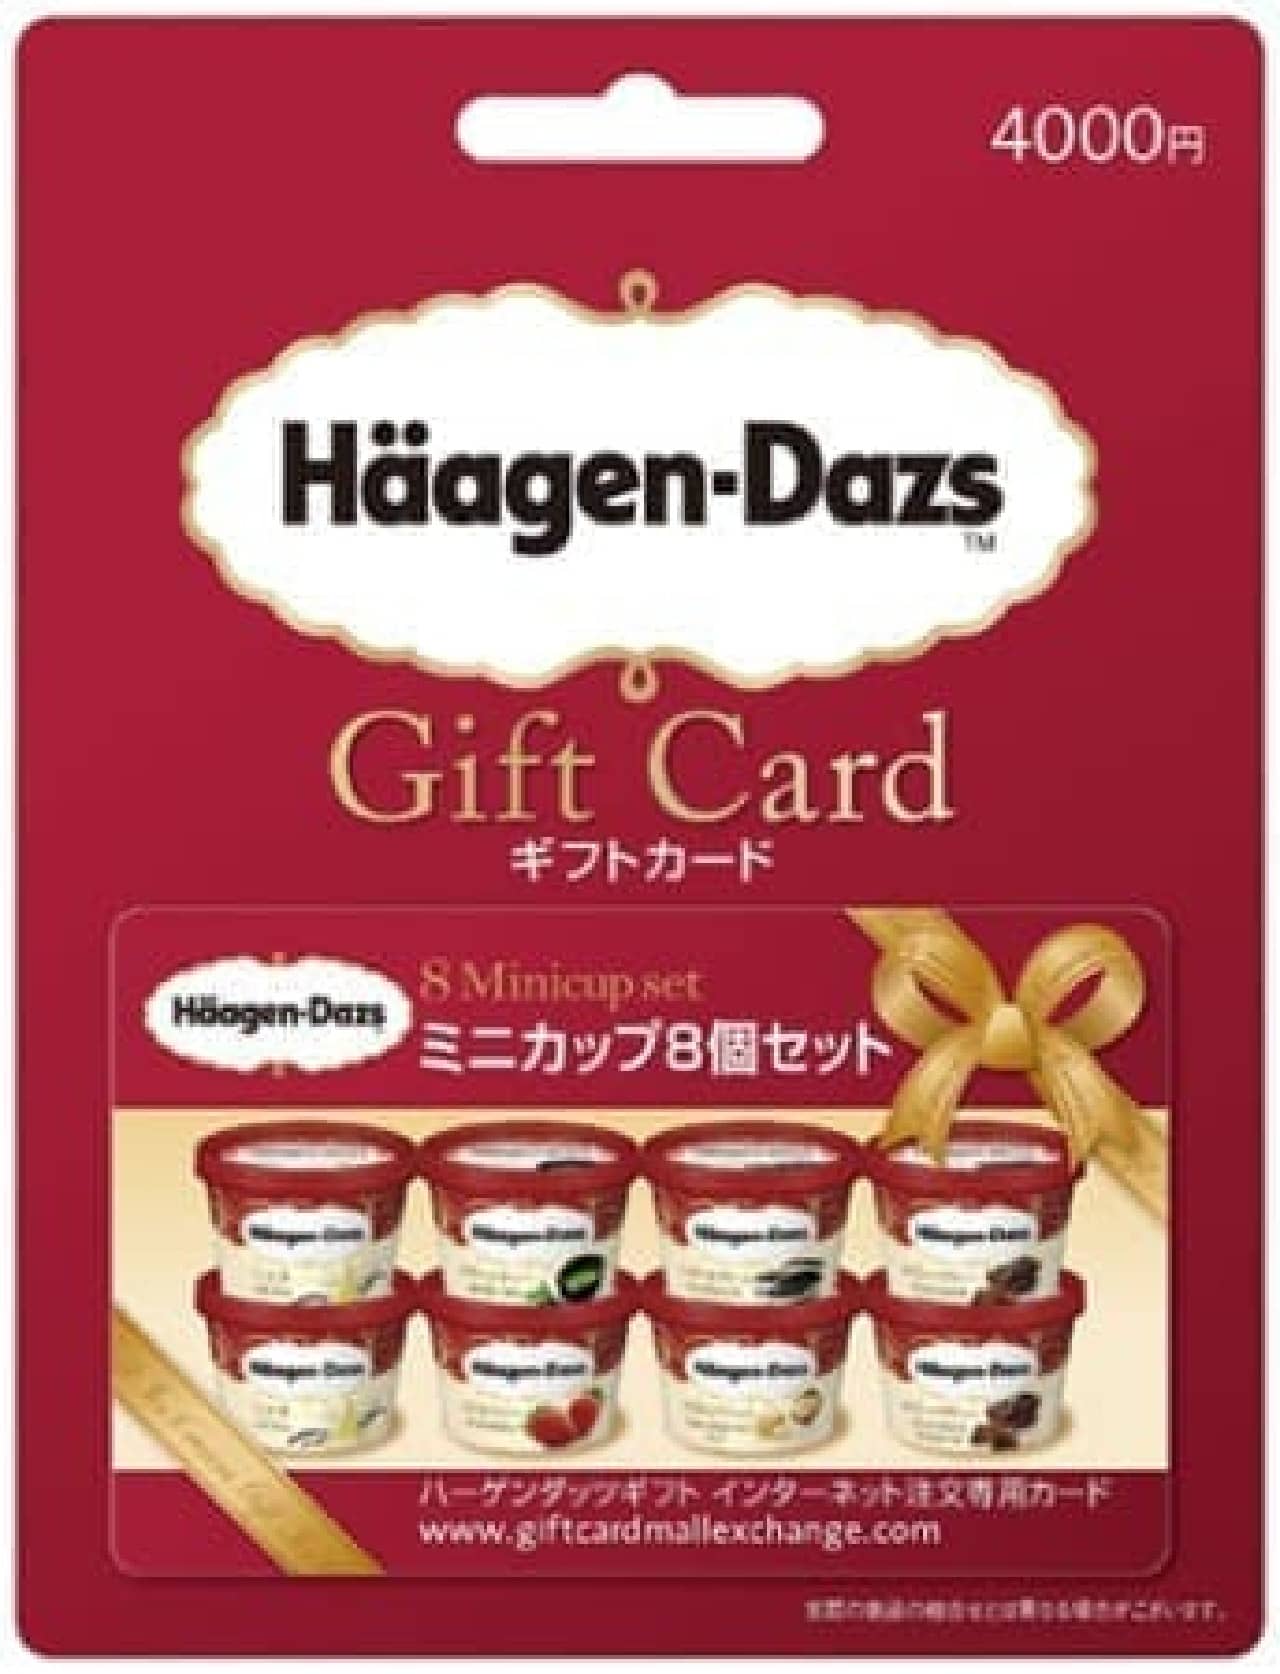 "Gift card" that can be used for gifts